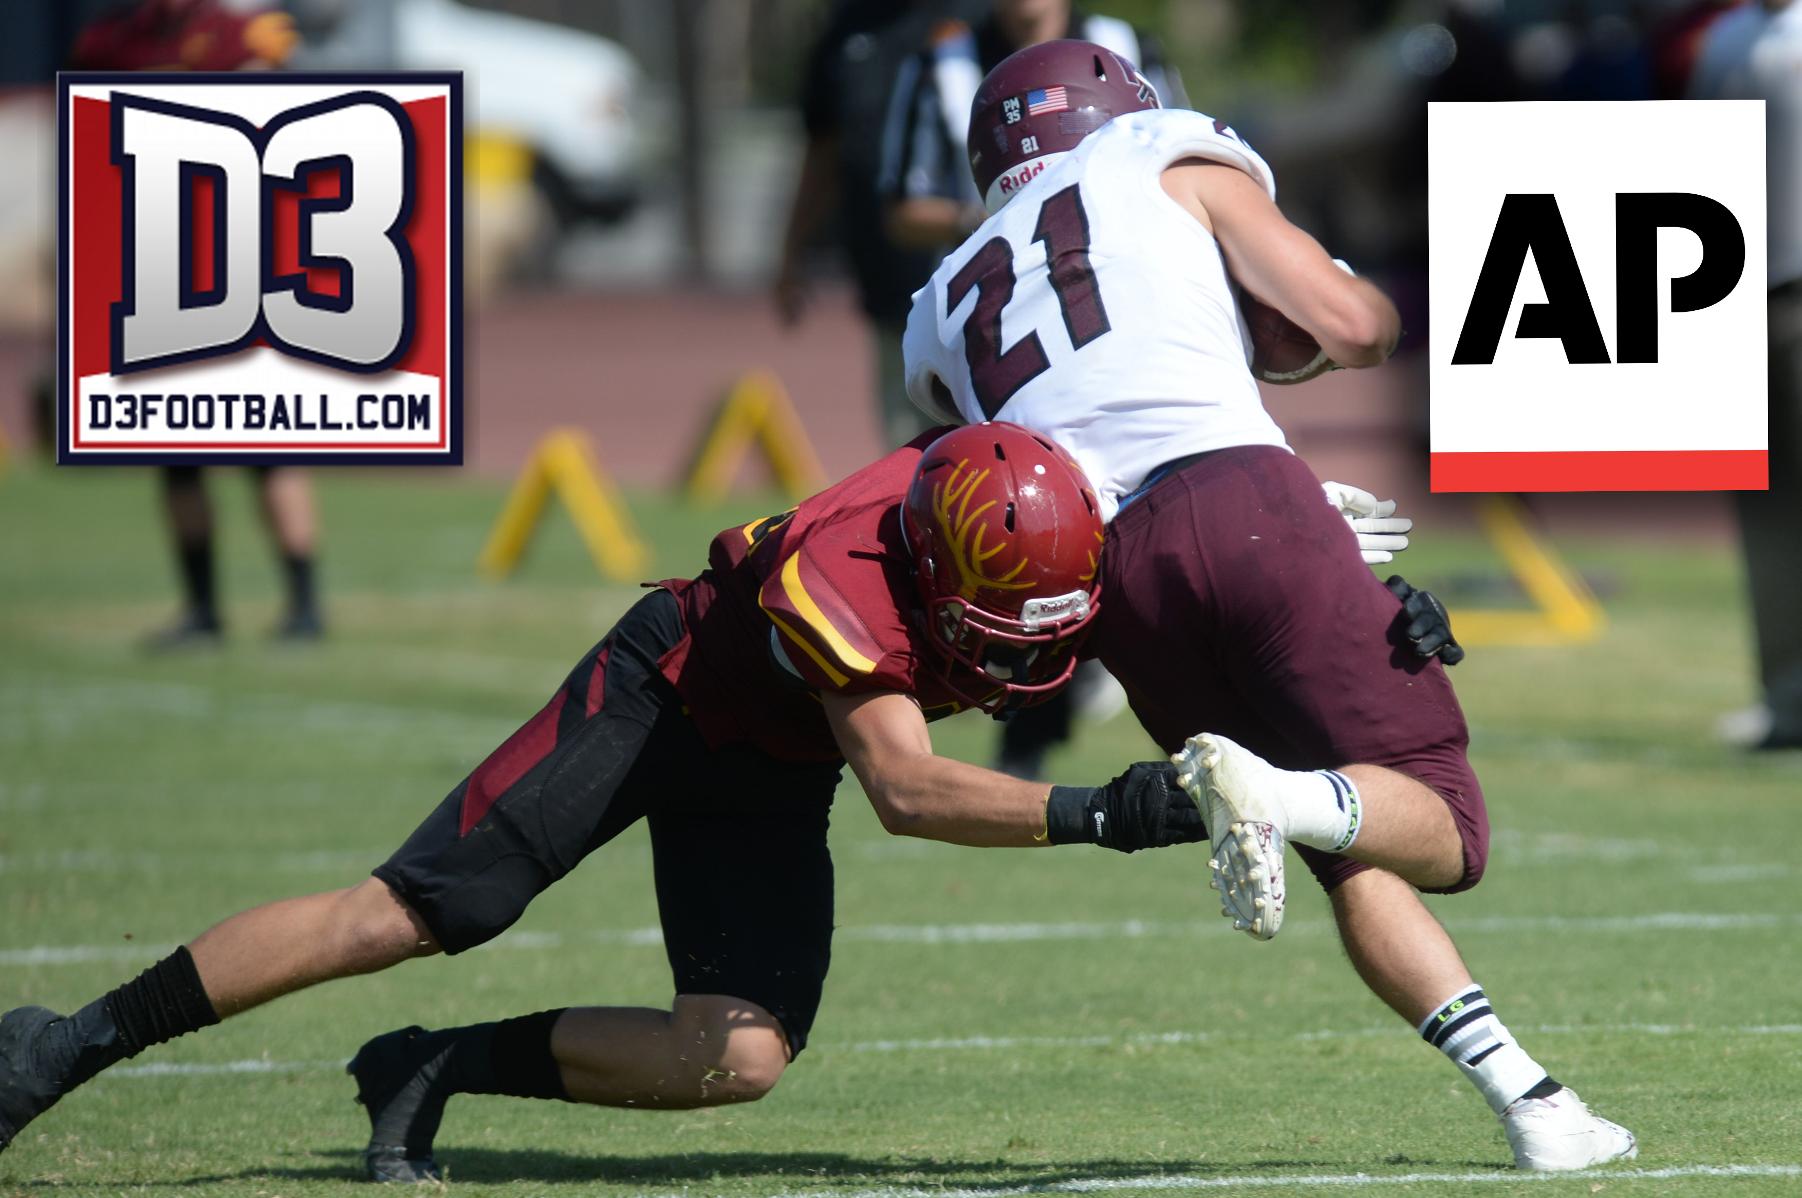 Bunce reels in more accolades from D3football.com and Associated Press